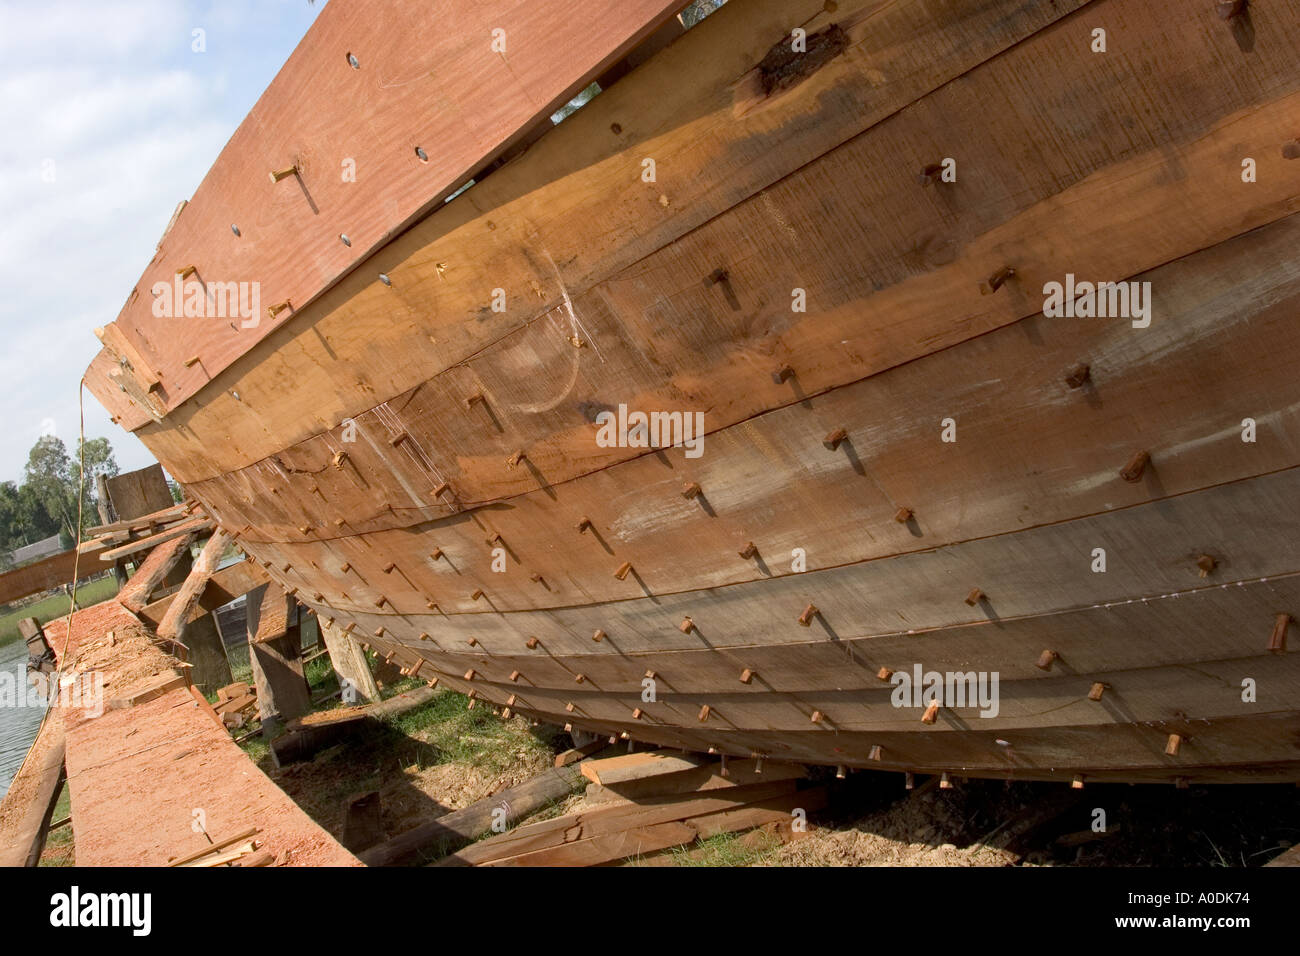 Vietnam Hoi An Cam Kim Island boatbuilding wooden pegs fixing planks to hull Stock Photo